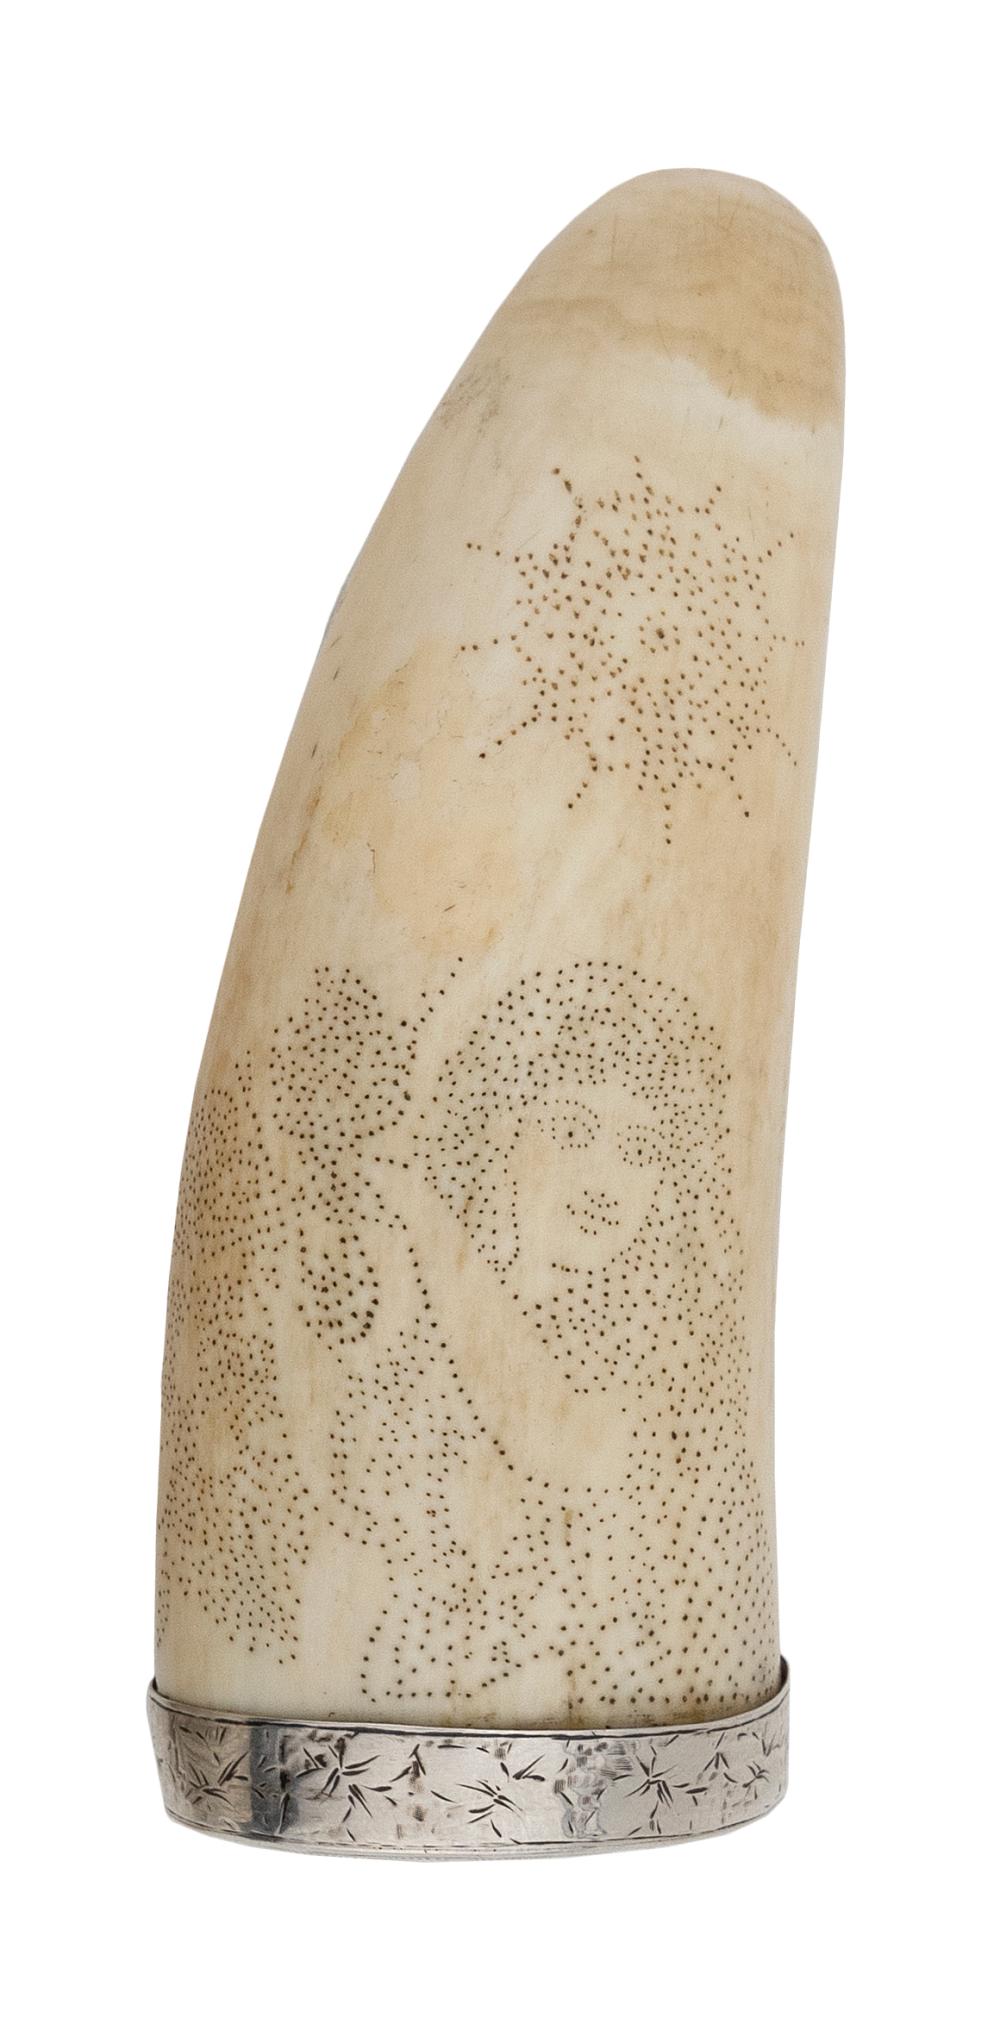 PINPOINT SCRIMSHAW WHALE S TOOTH 35014a